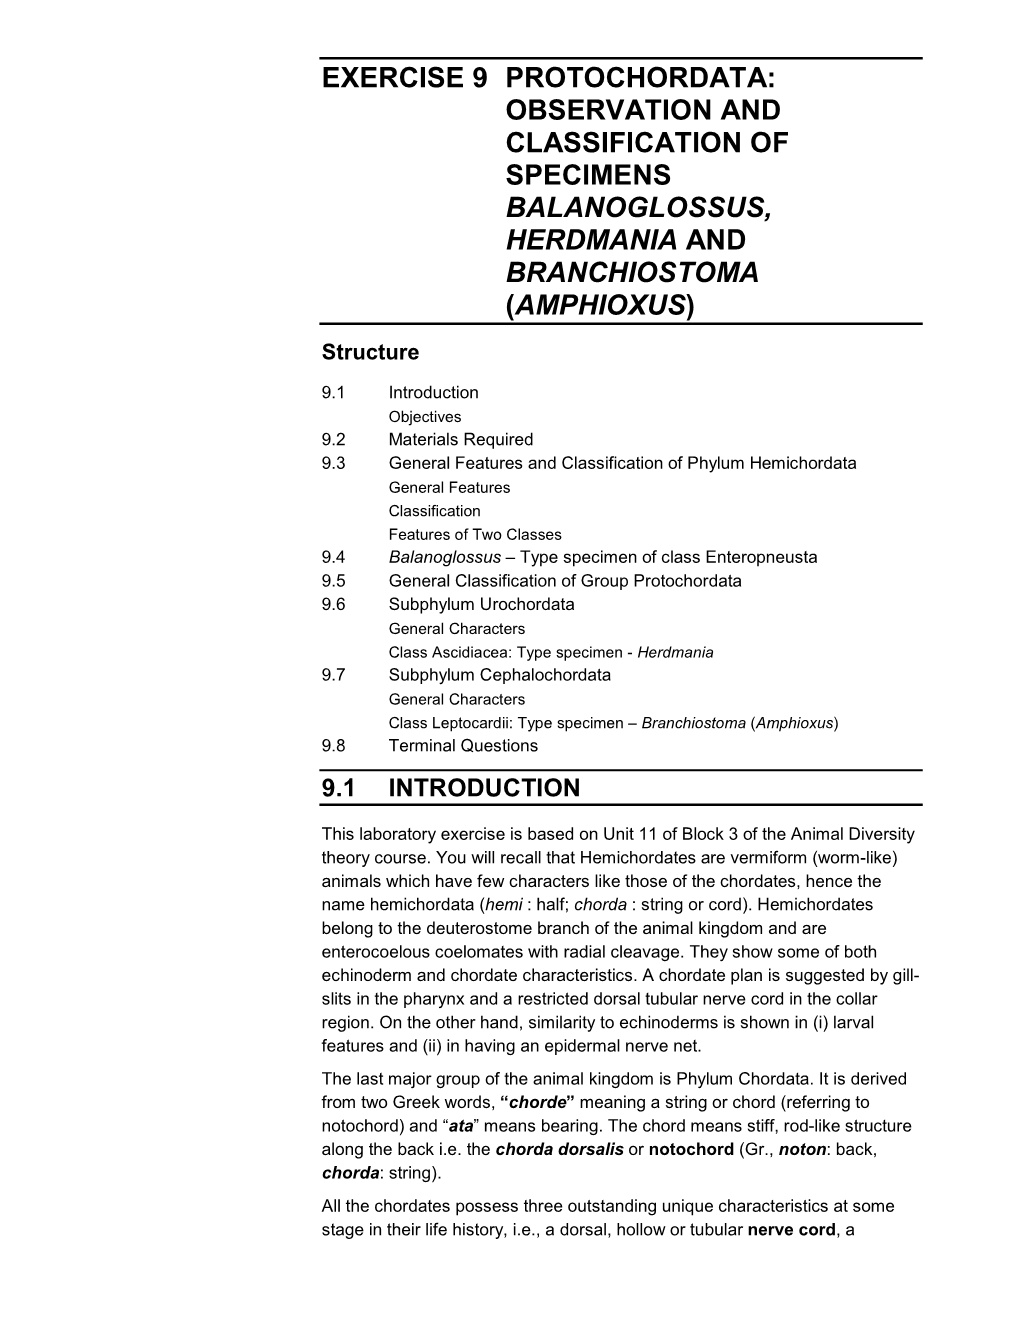 EXERCISE 9 PROTOCHORDATA: OBSERVATION and CLASSIFICATION of SPECIMENS BALANOGLOSSUS, HERDMANIA and BRANCHIOSTOMA (AMPHIOXUS ) Structure